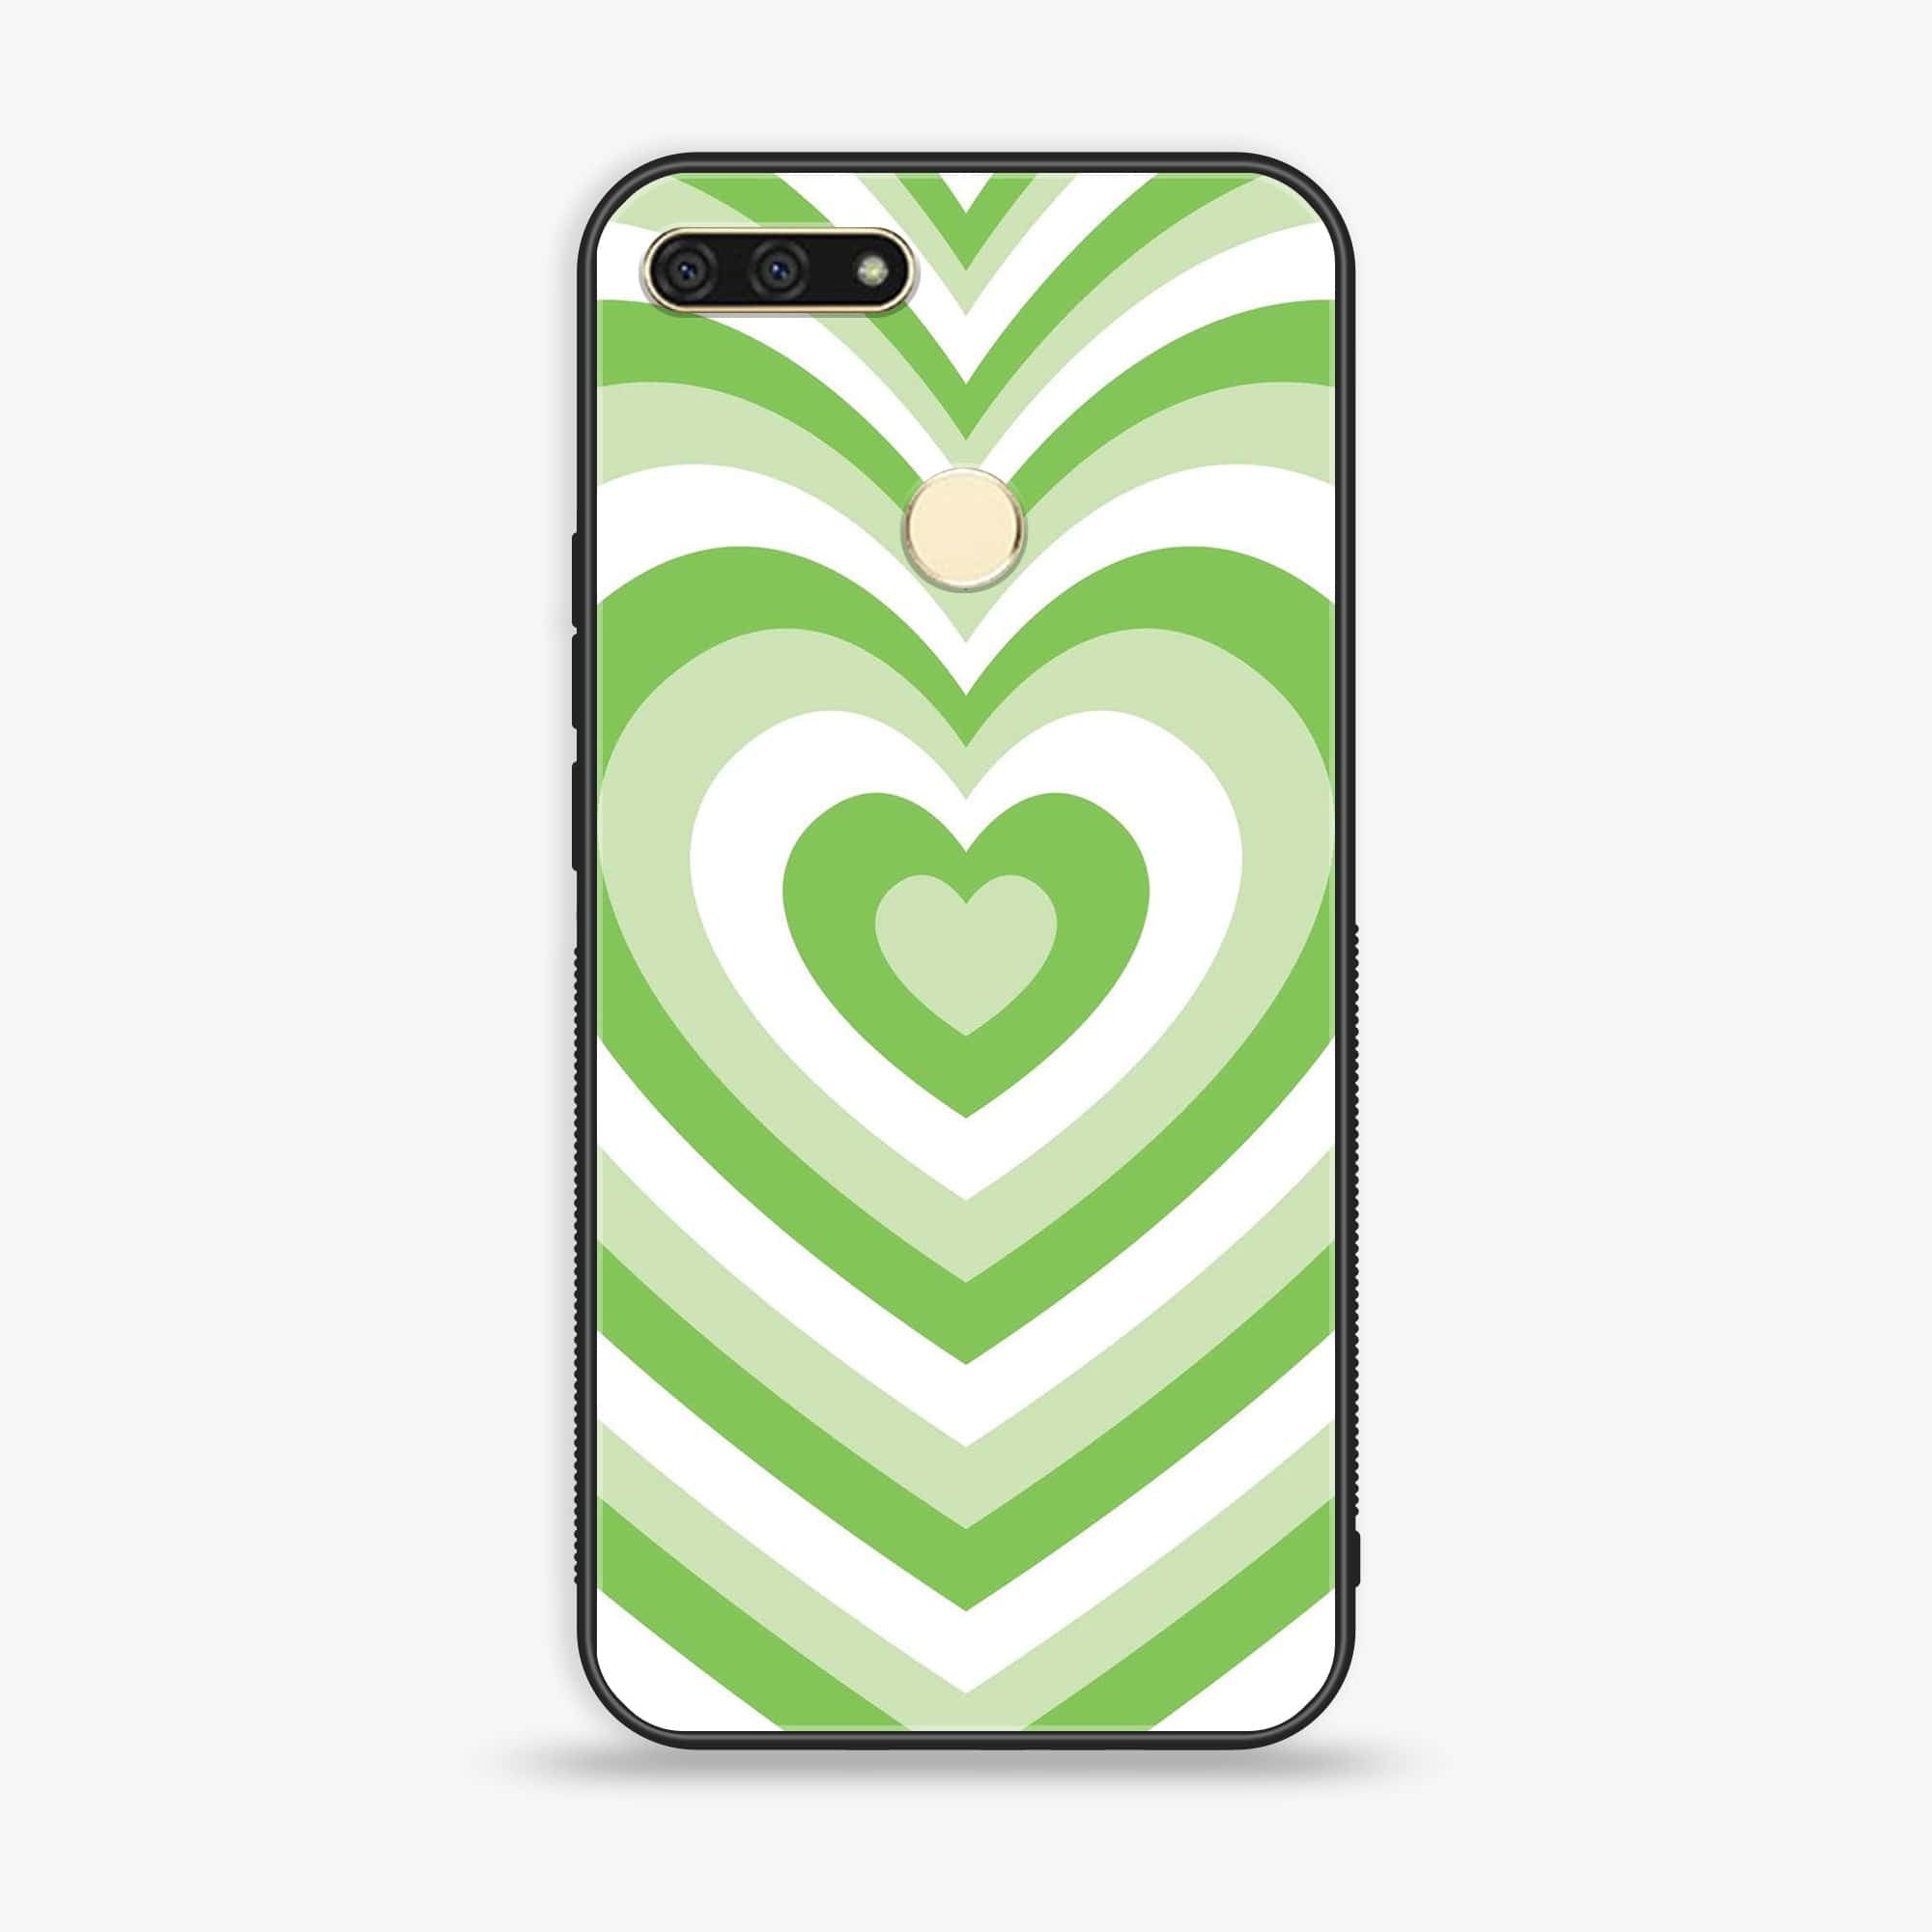 Huawei Y6 2018/Honor Play 7A - Heart Beat Series - Premium Printed Glass soft Bumper shock Proof Case